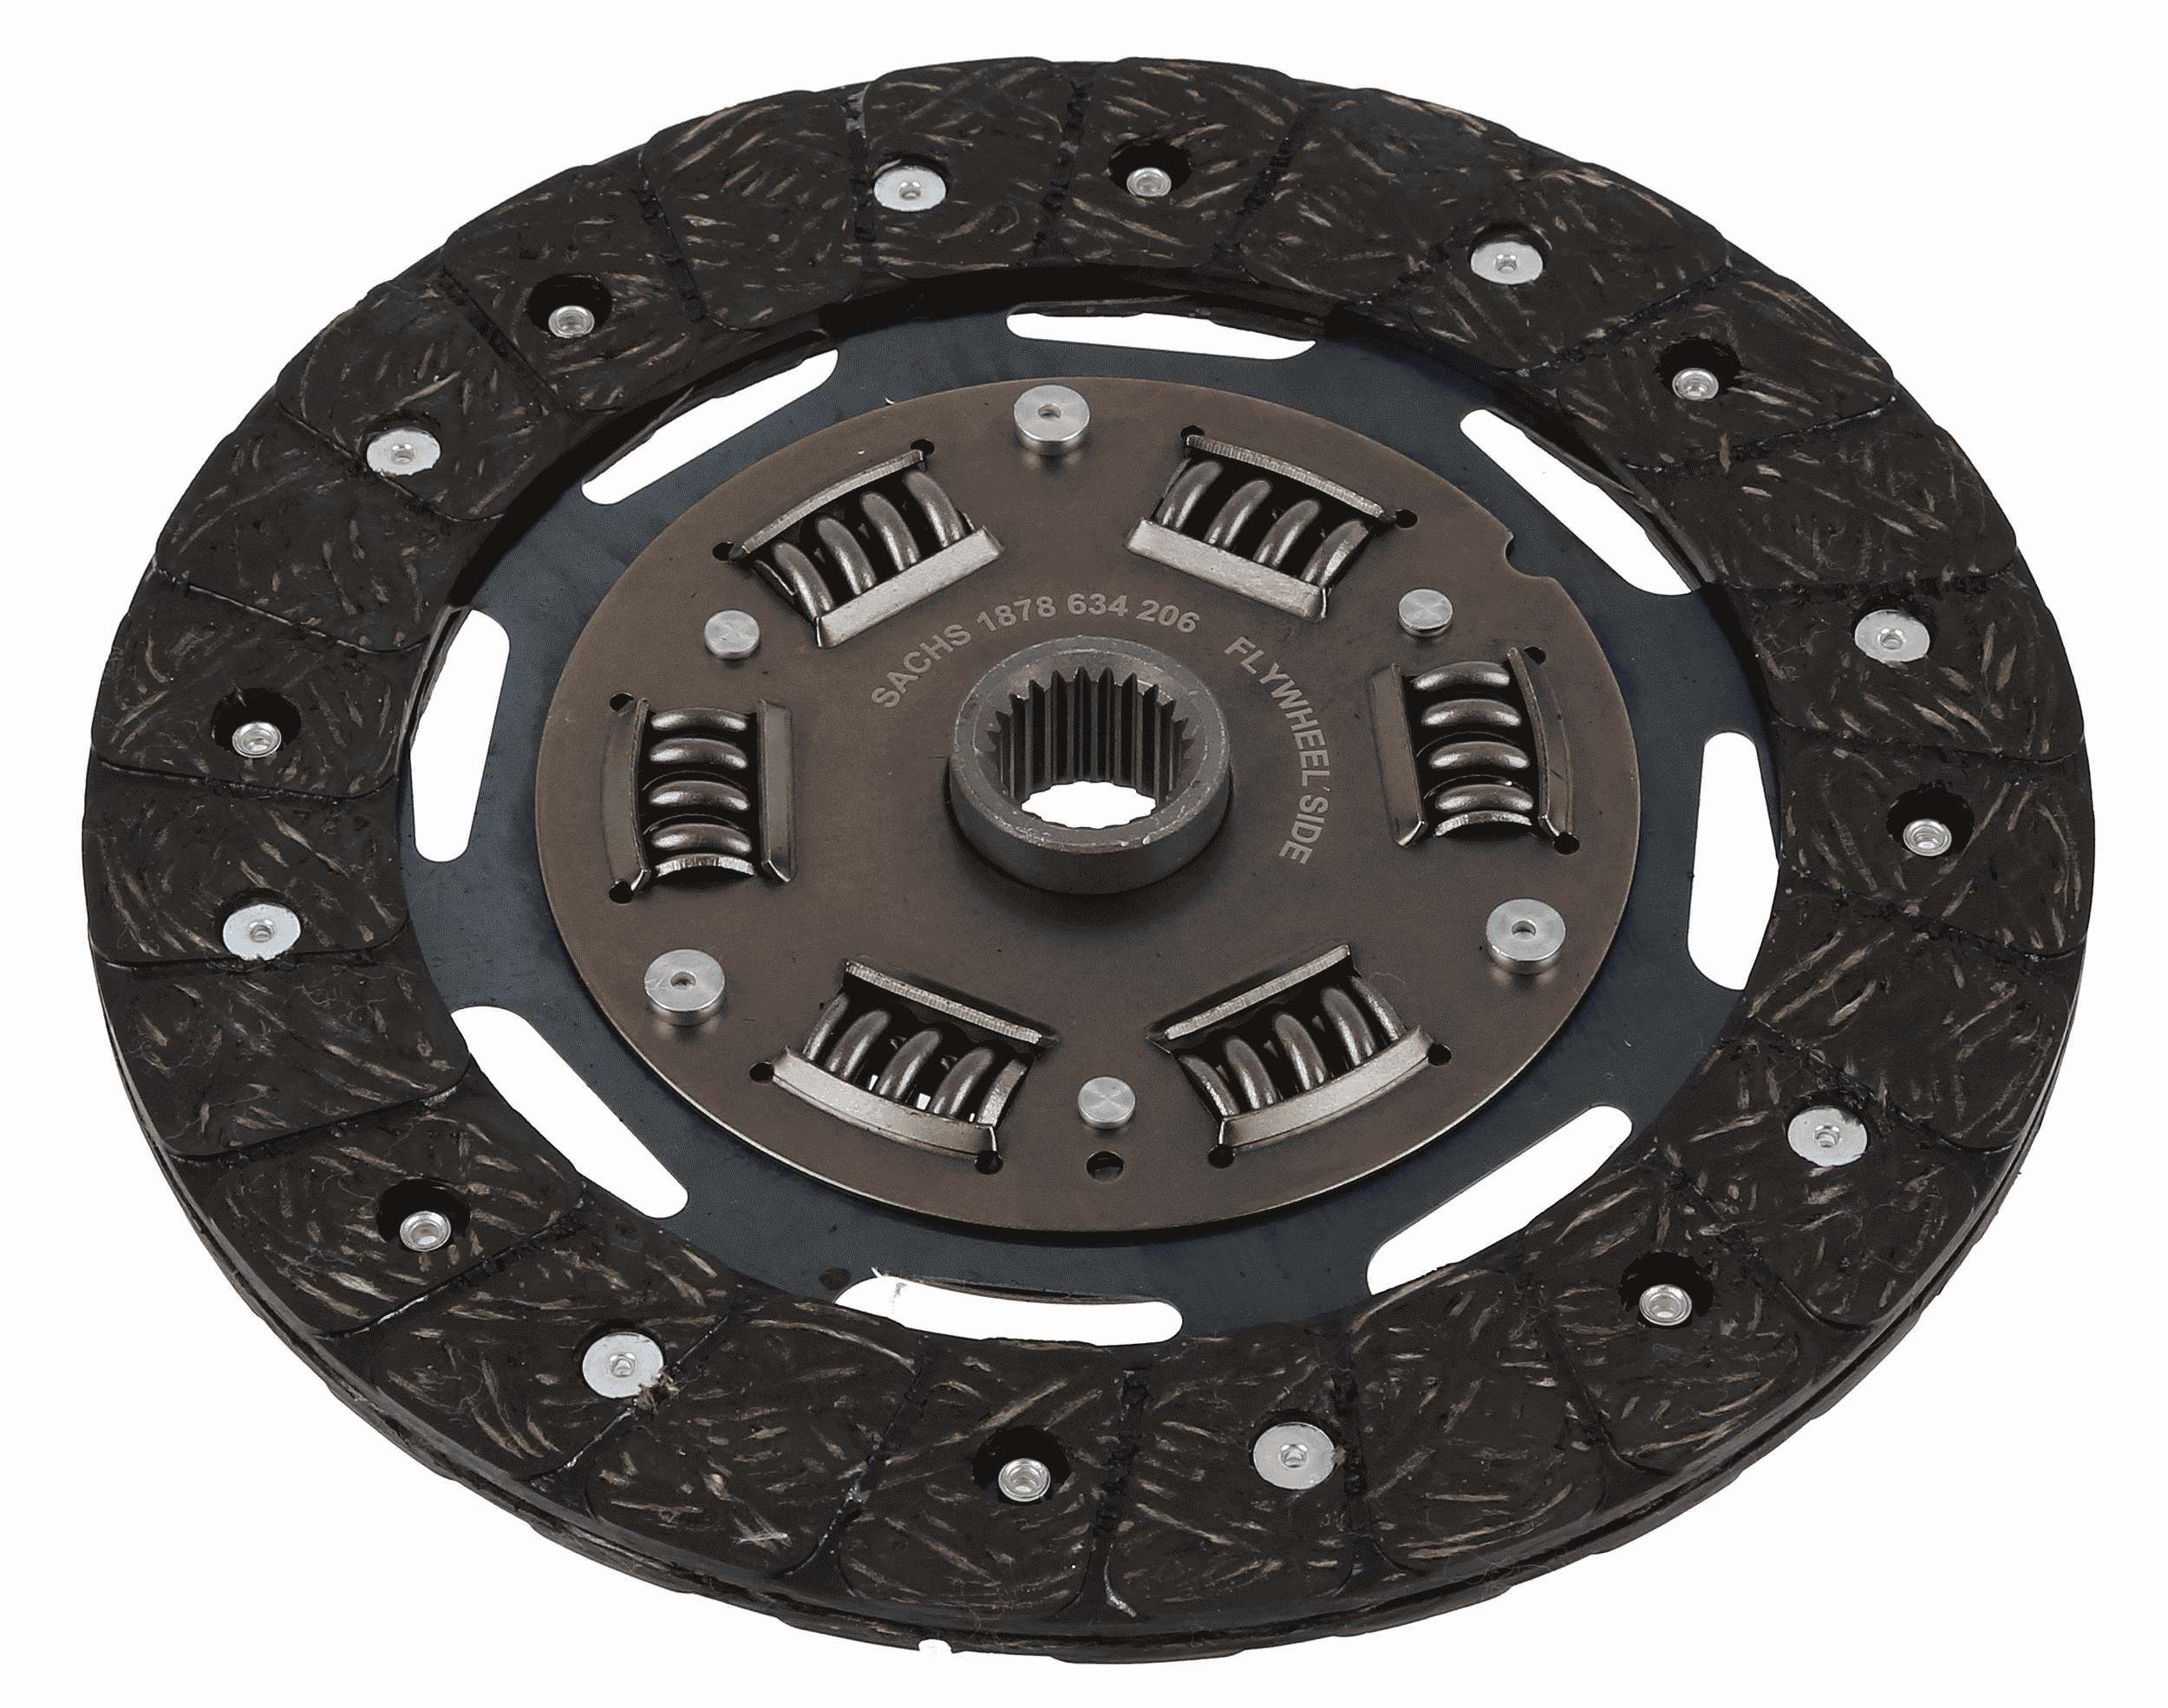 SACHS Clutch plate VW Lupo 3l new 1878 634 206